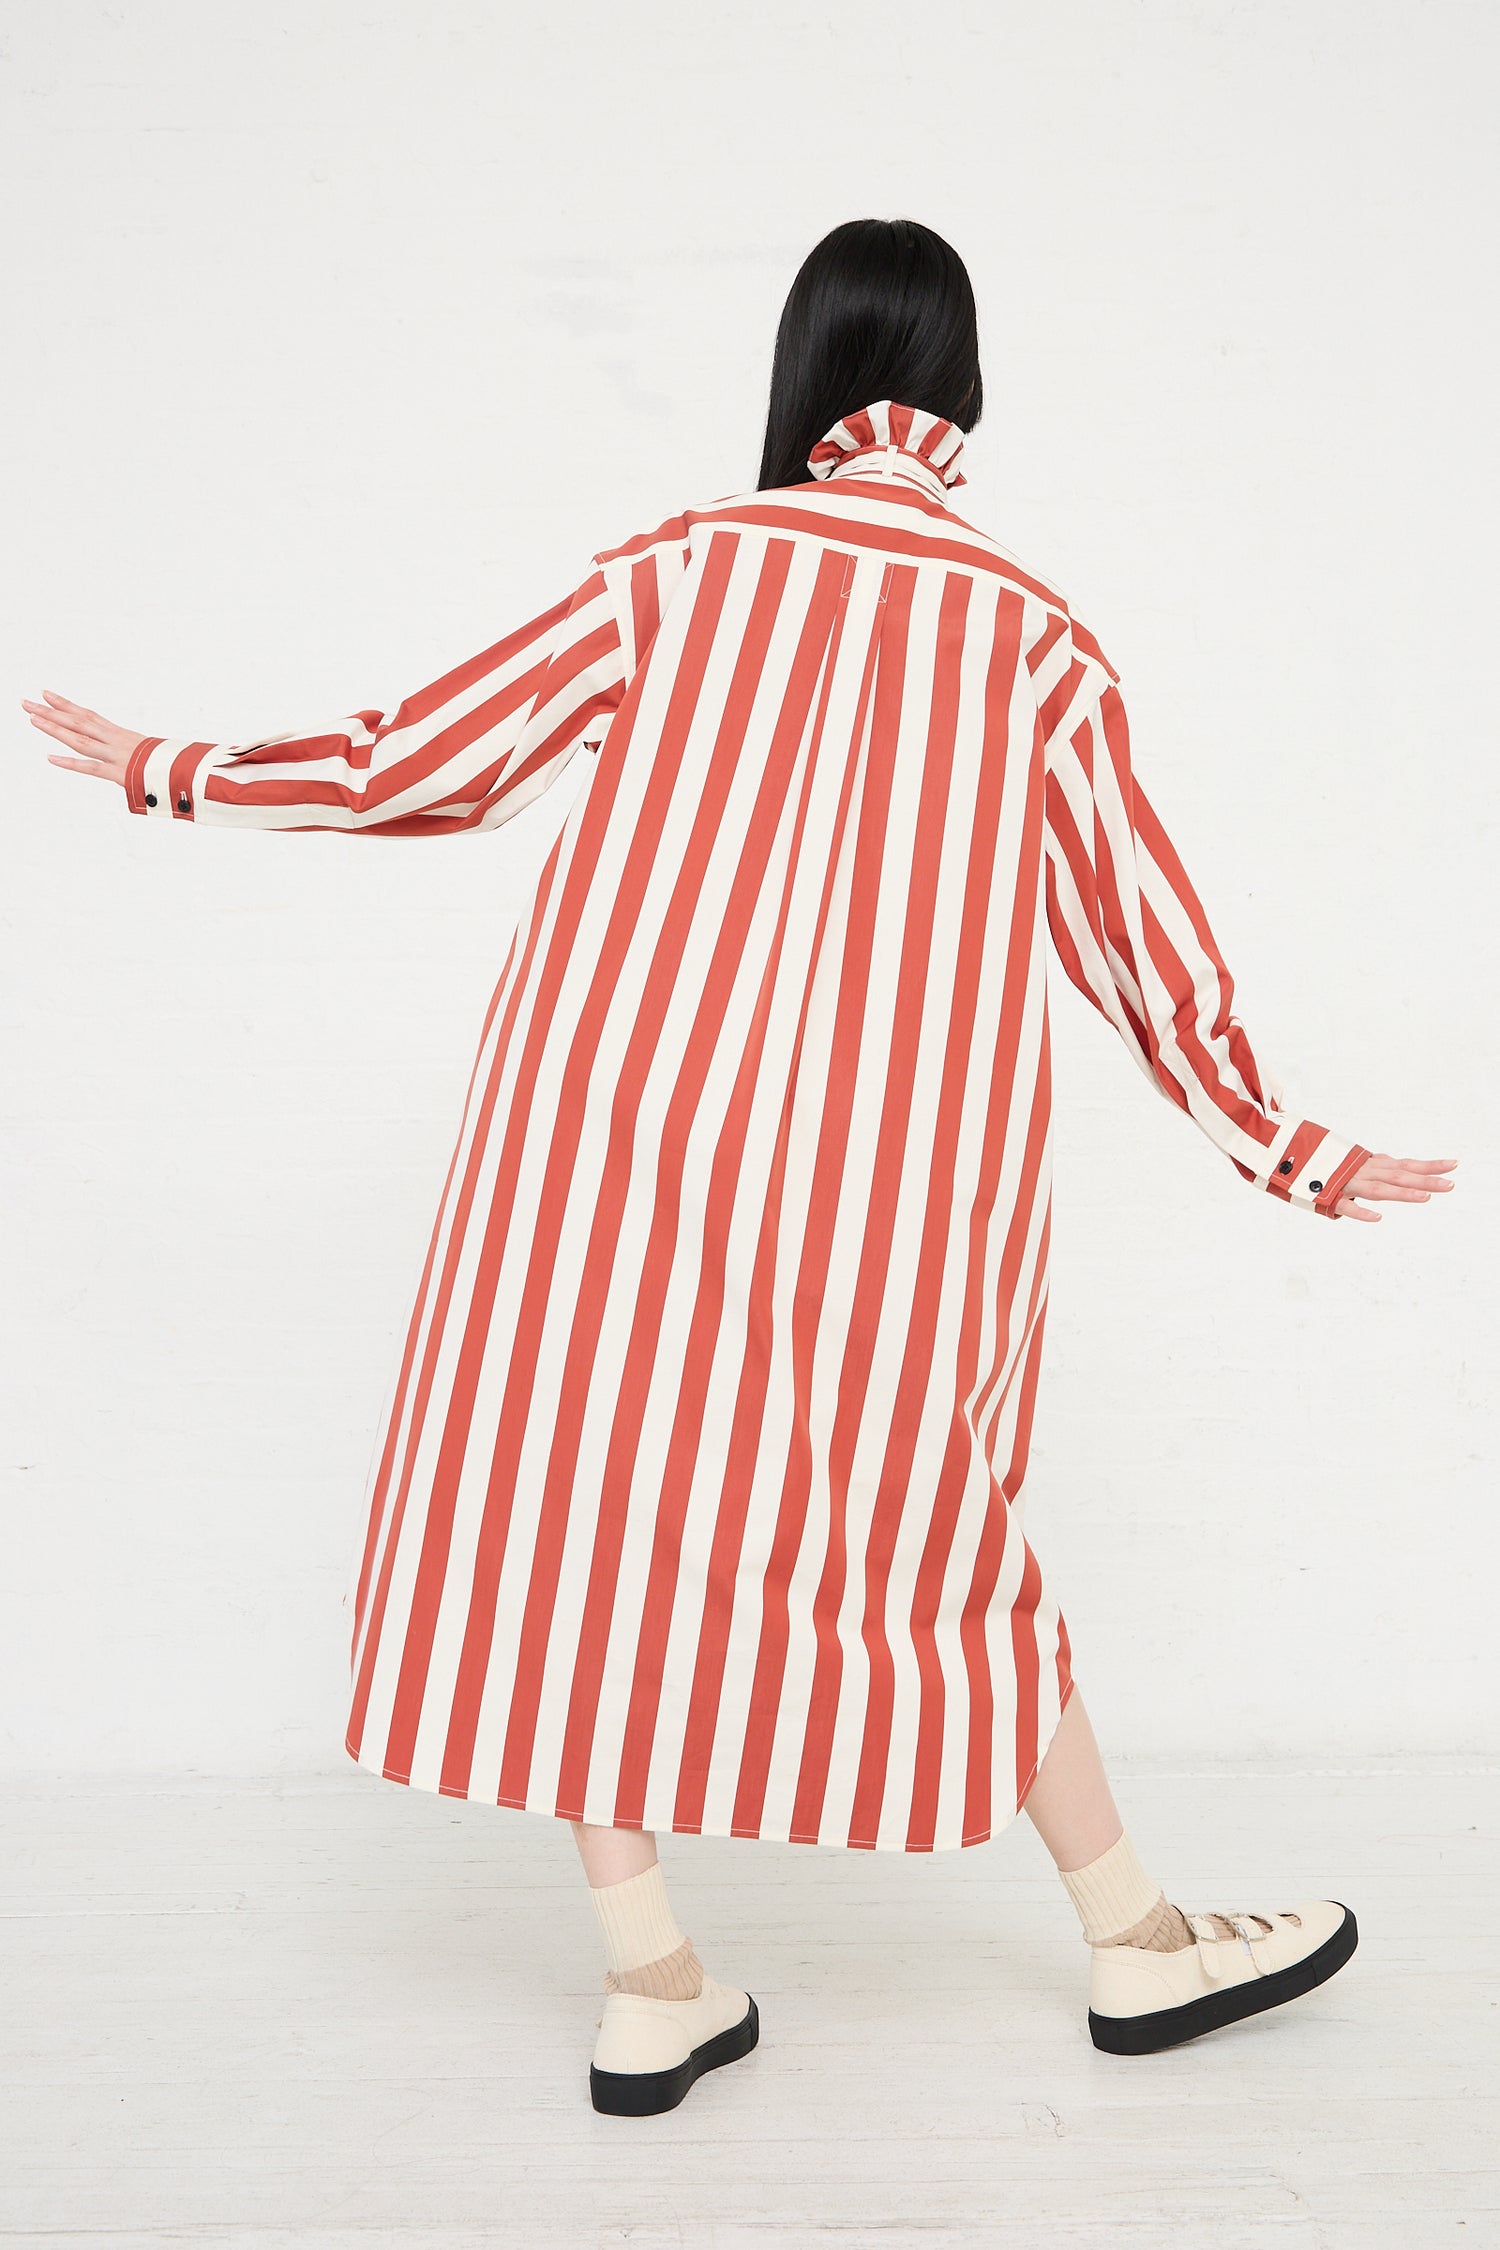 A person wearing a KasMaria Cotton Poplin Ruffle Neck Shirt Dress in Stripe with arms outstretched, viewed from behind.